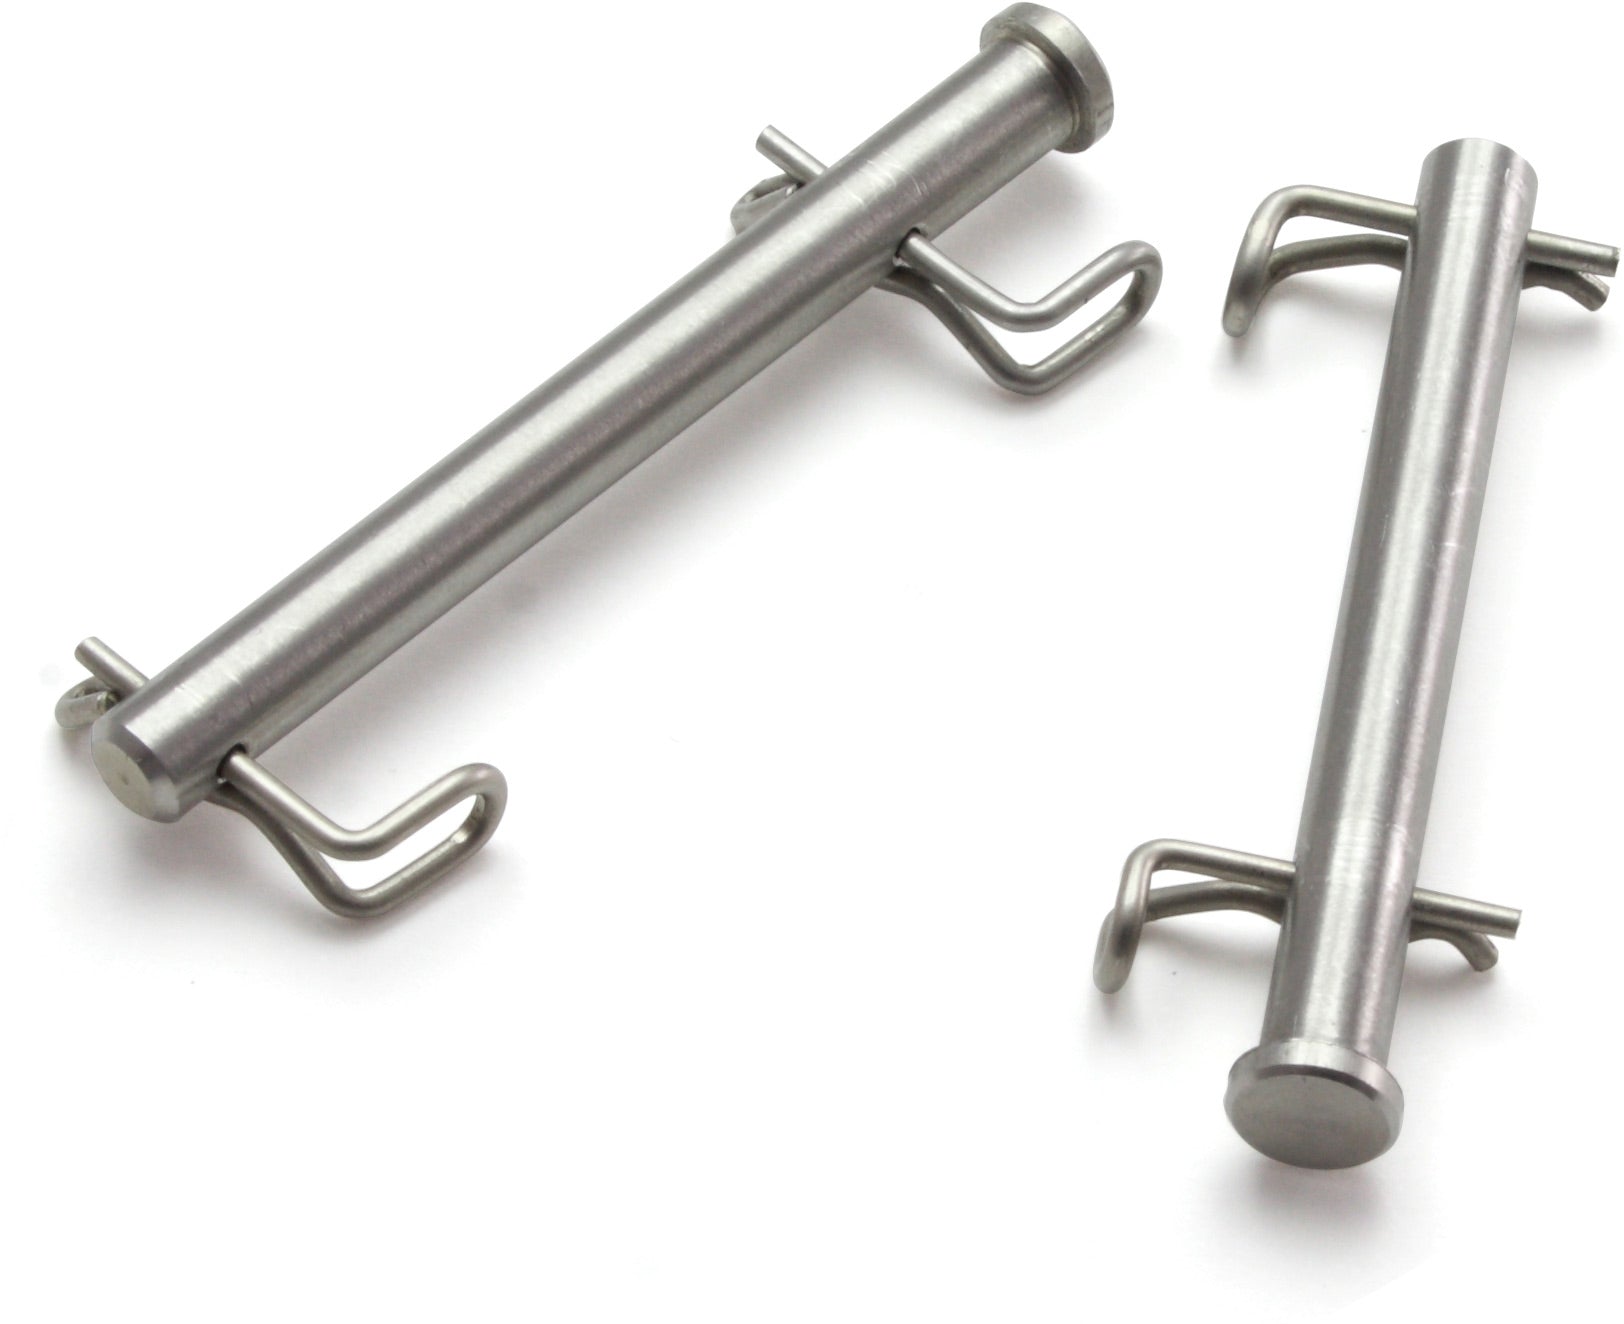 Stainless brake pin set for KTM, Husky, and Brembo motorcycles, 2 pieces, close-up view